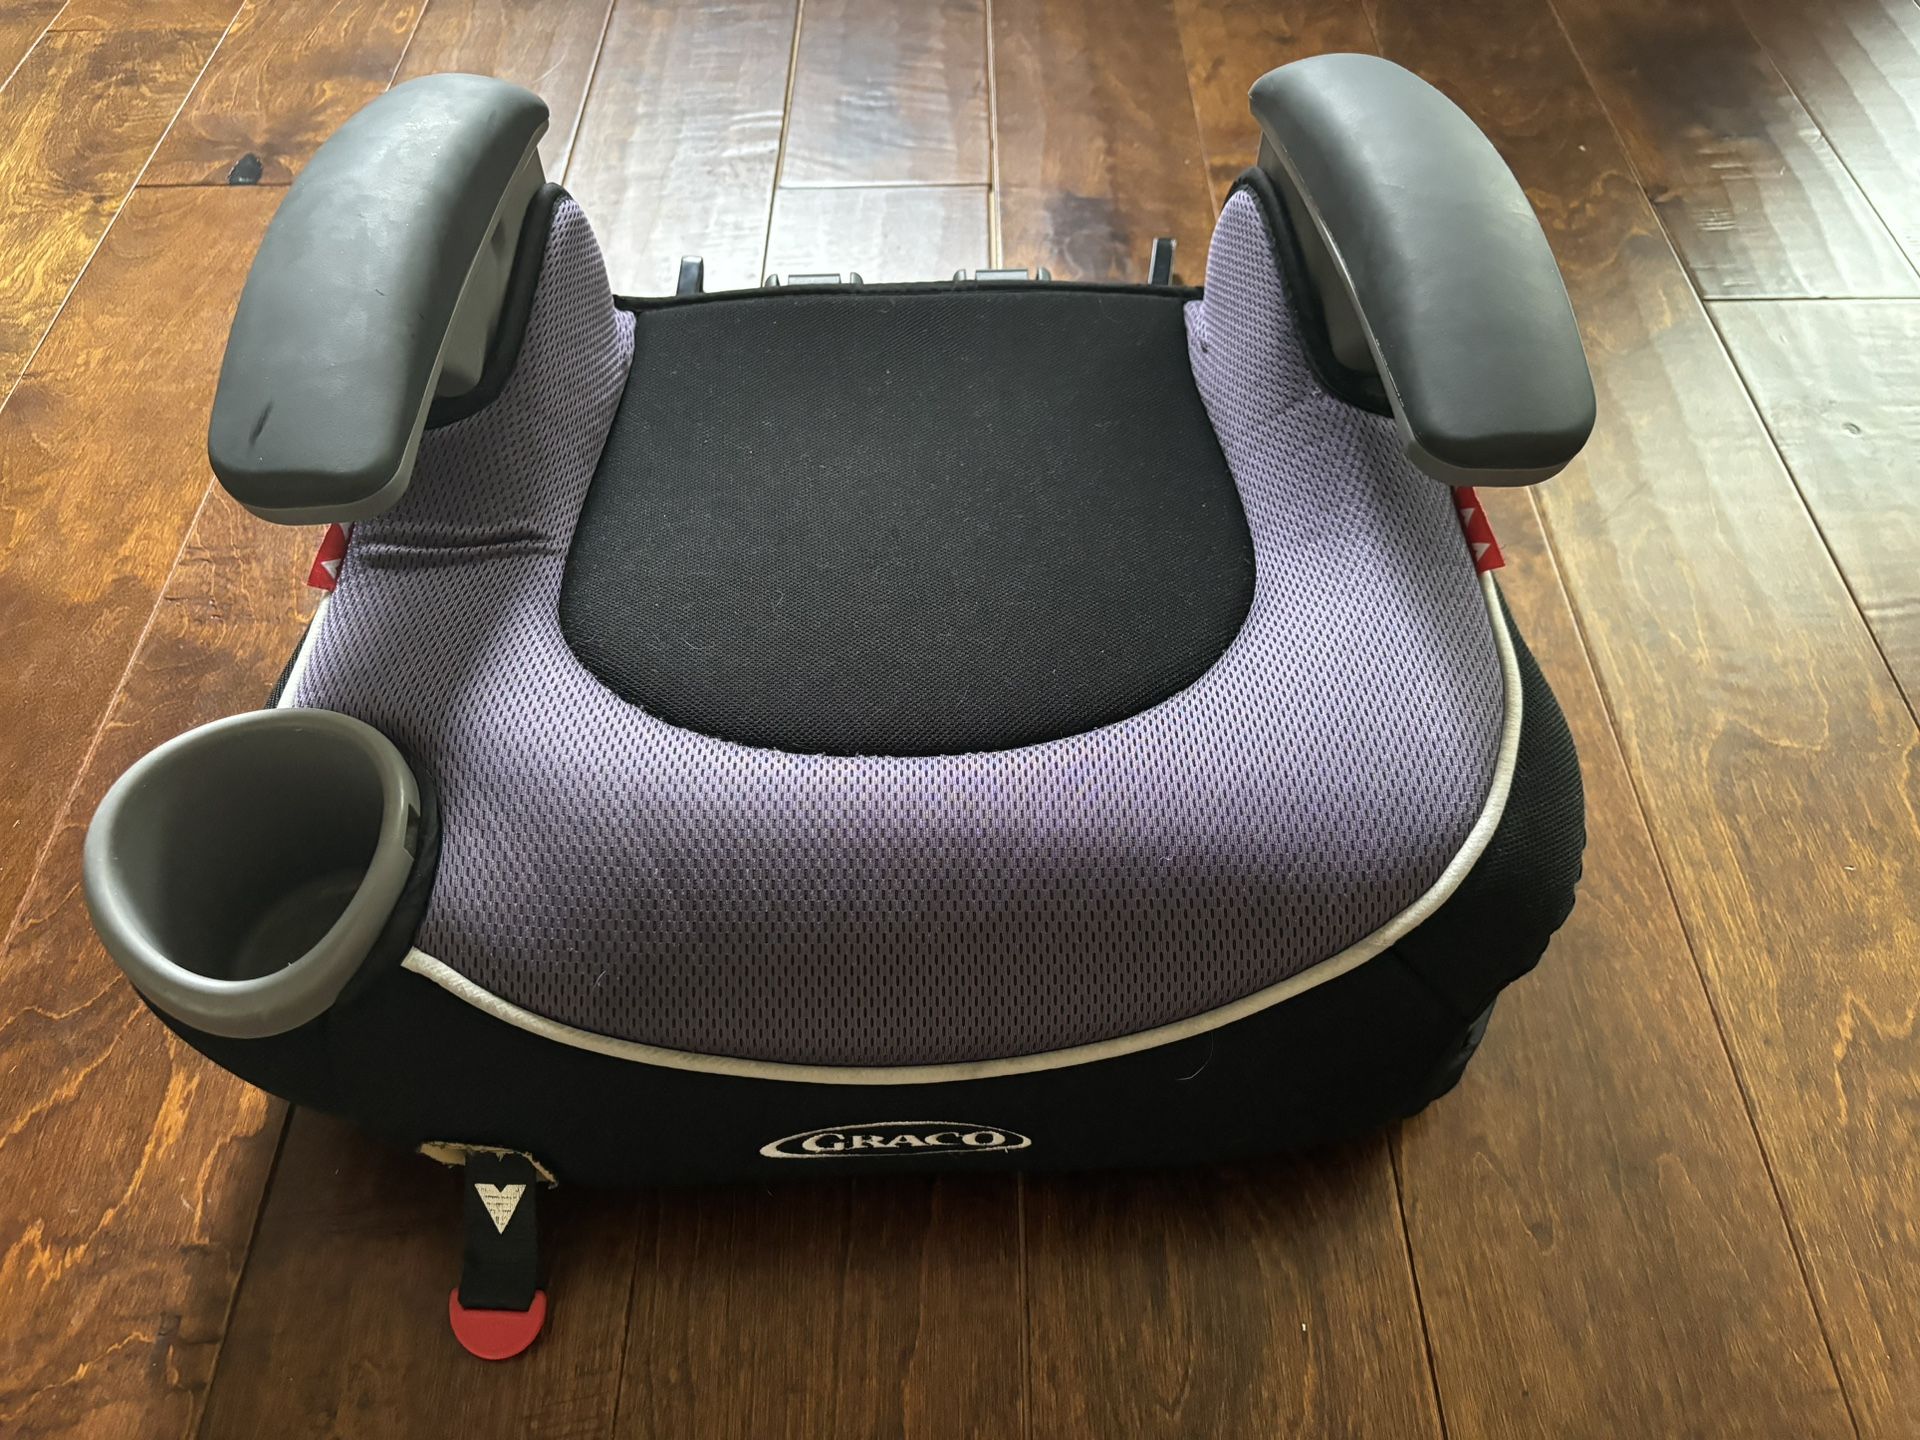 Graco Backless Turbo XL Purple Booster Seat